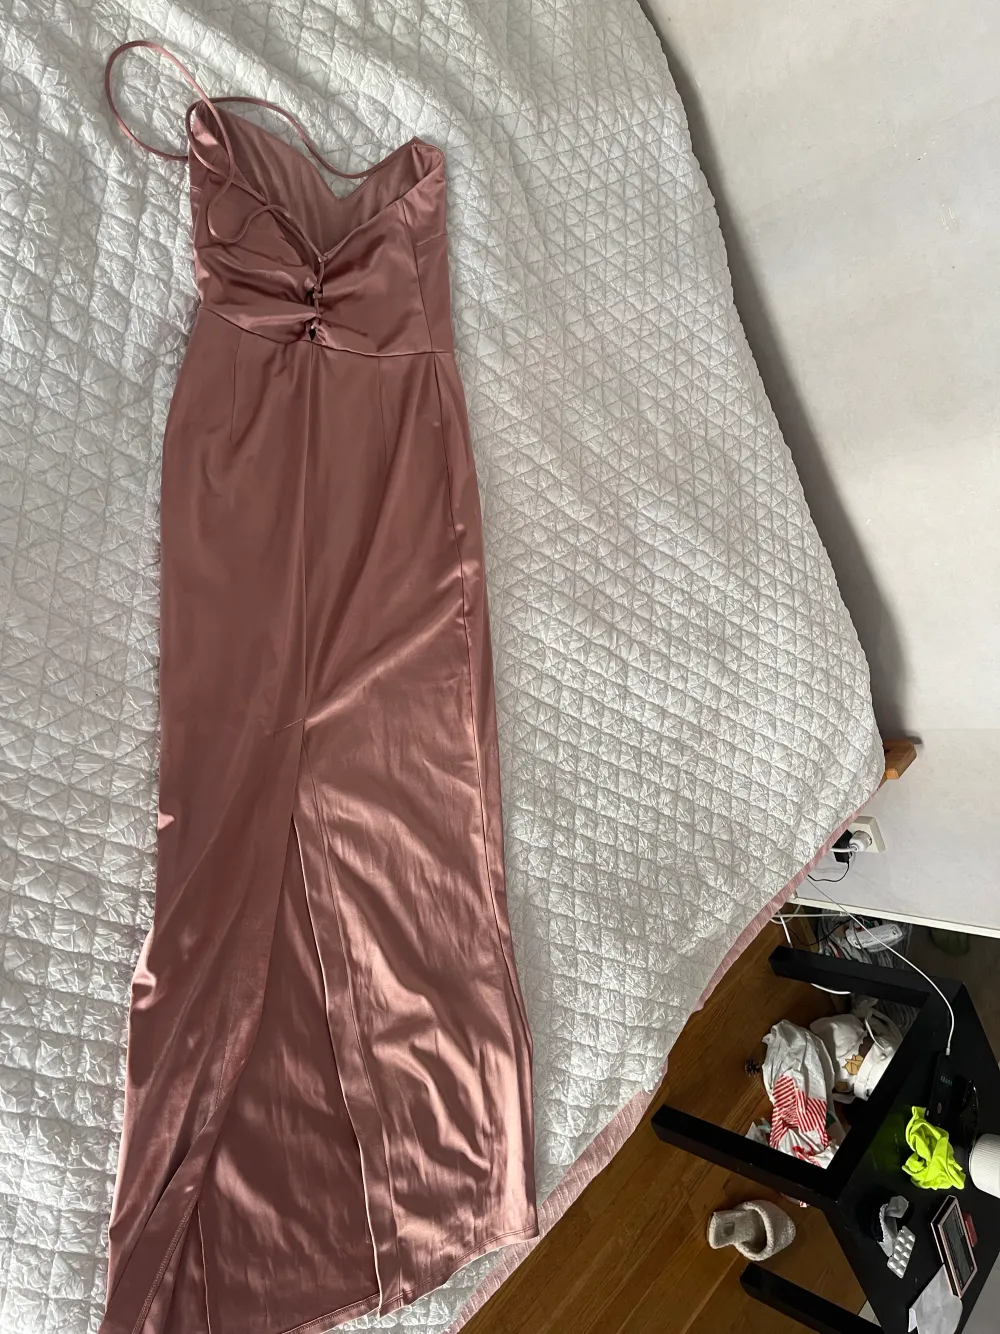 Pink satin dress HnM size 38 long thin straps tied in the back. Slit in the back. Perfect for prom or fancy dinner. Stretchy material . Klänningar.